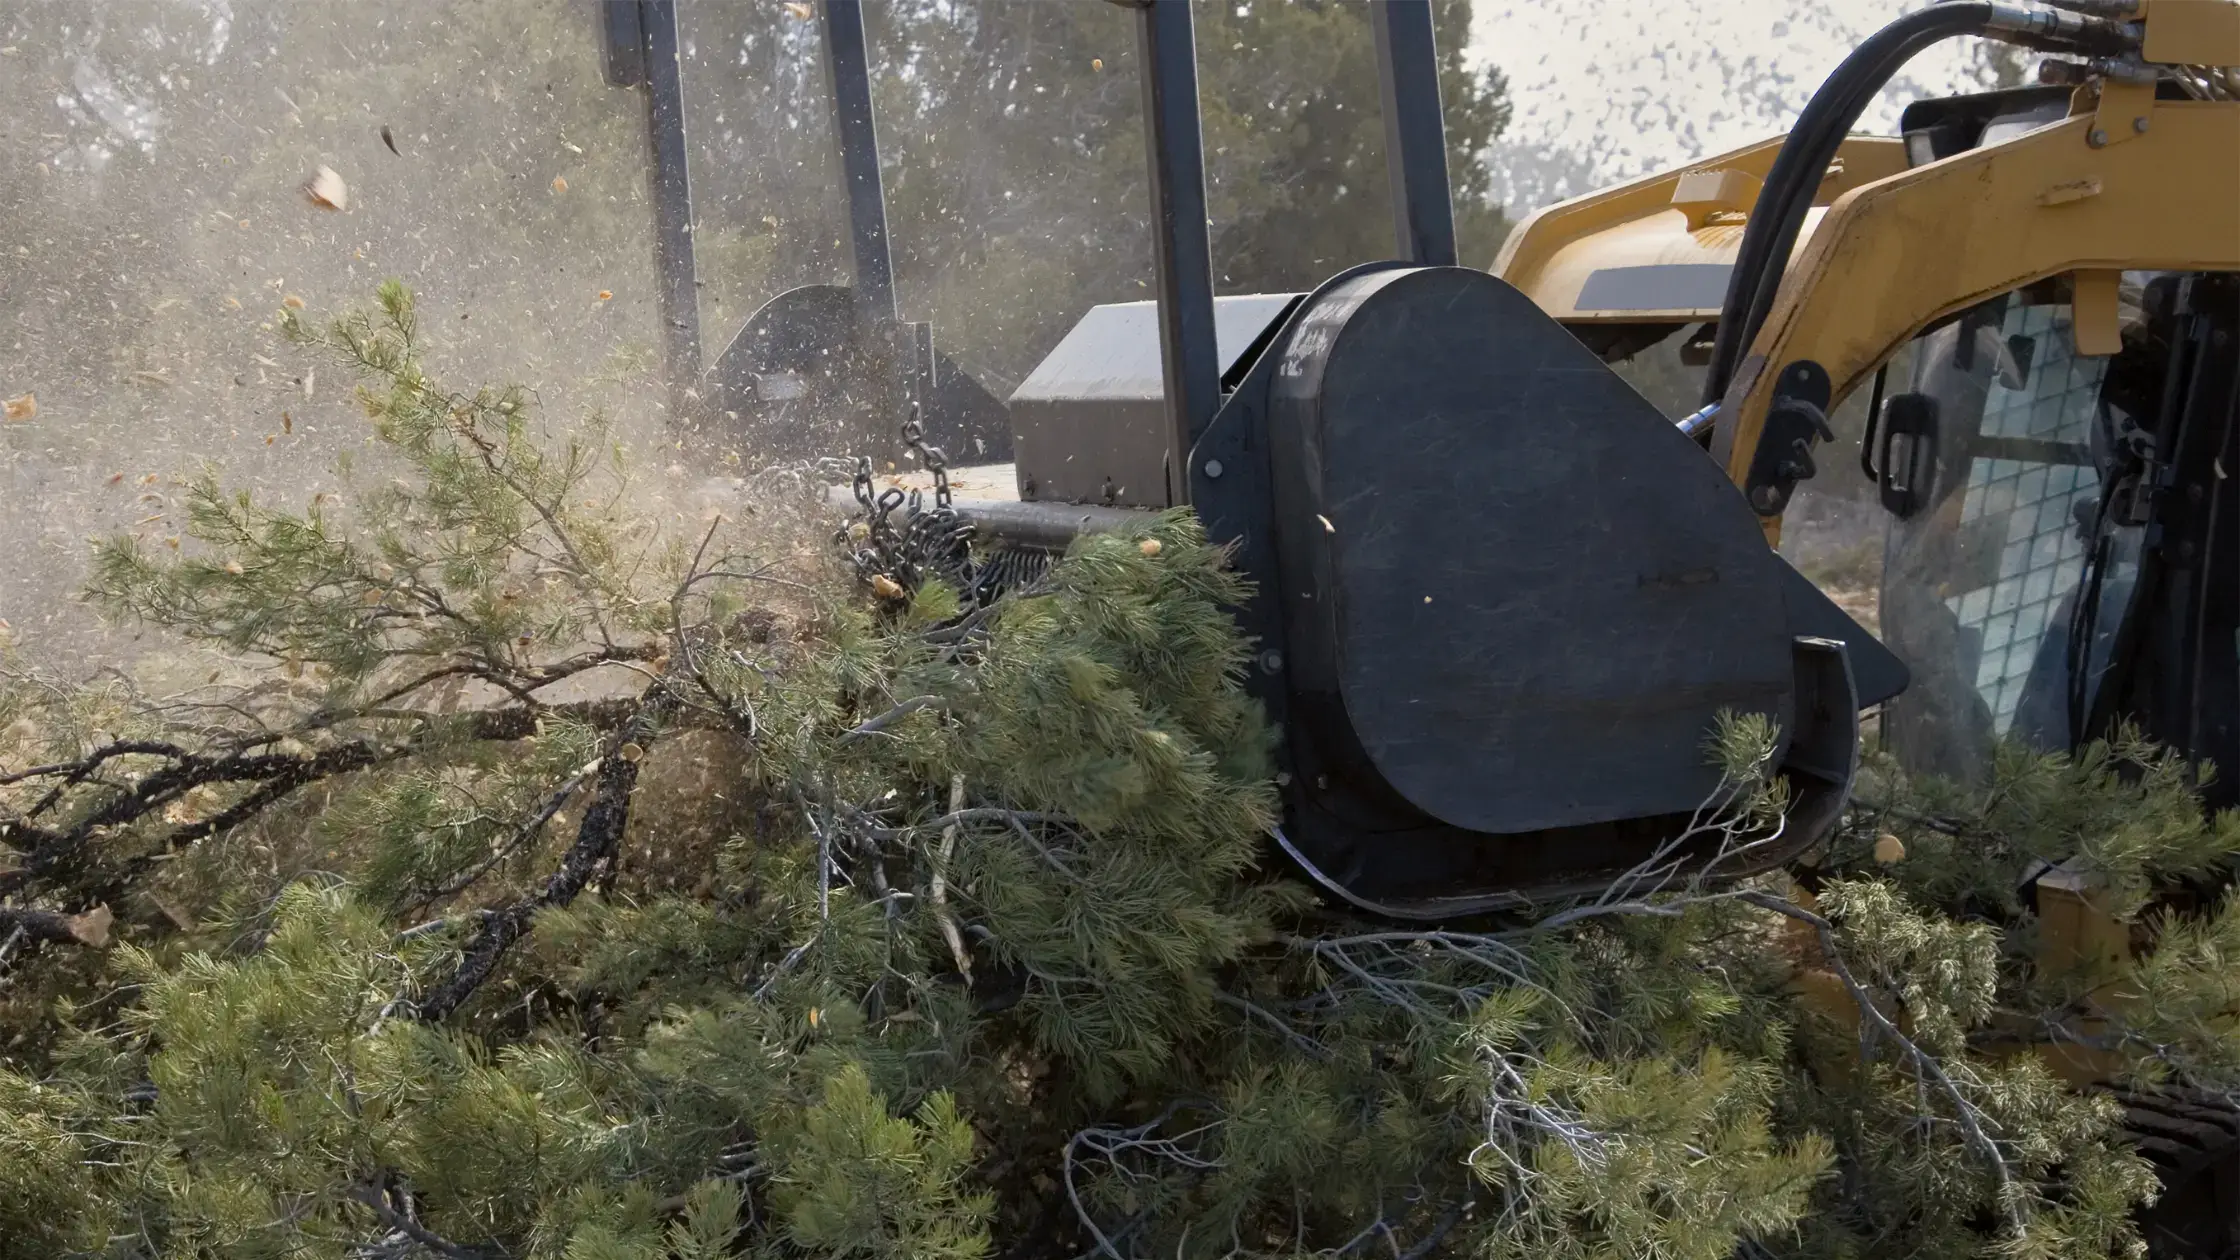 How Much Does a Skid Steer Weigh - Loader Carrying Fallen Trees